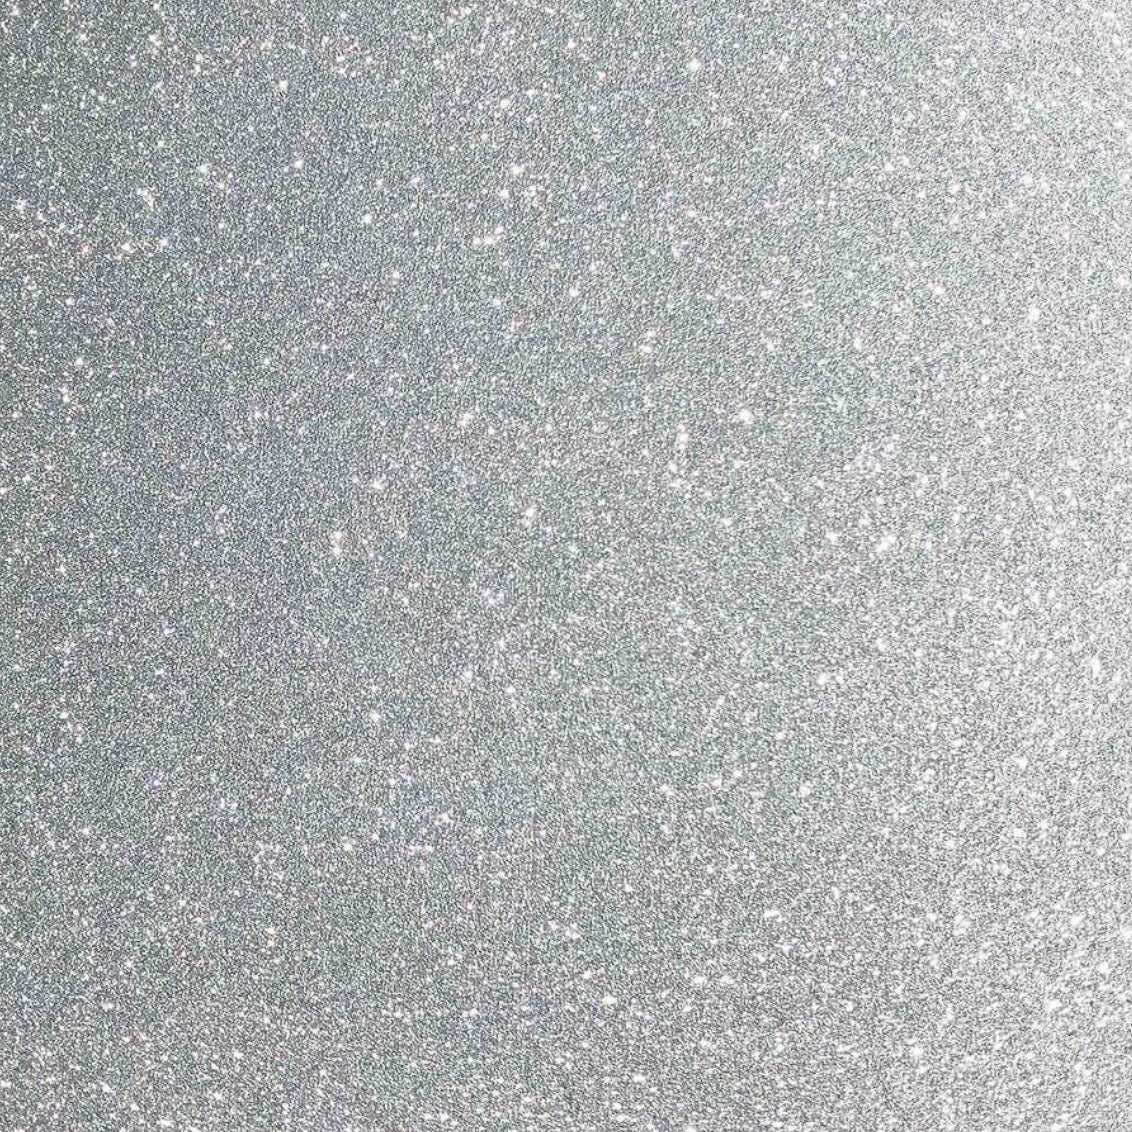 Silver Glitter Cardstock (10 Sheets, 300 Gsm) Silver Cardstock 12x12 Cardstock Paper Colored Cardstock (Silver)